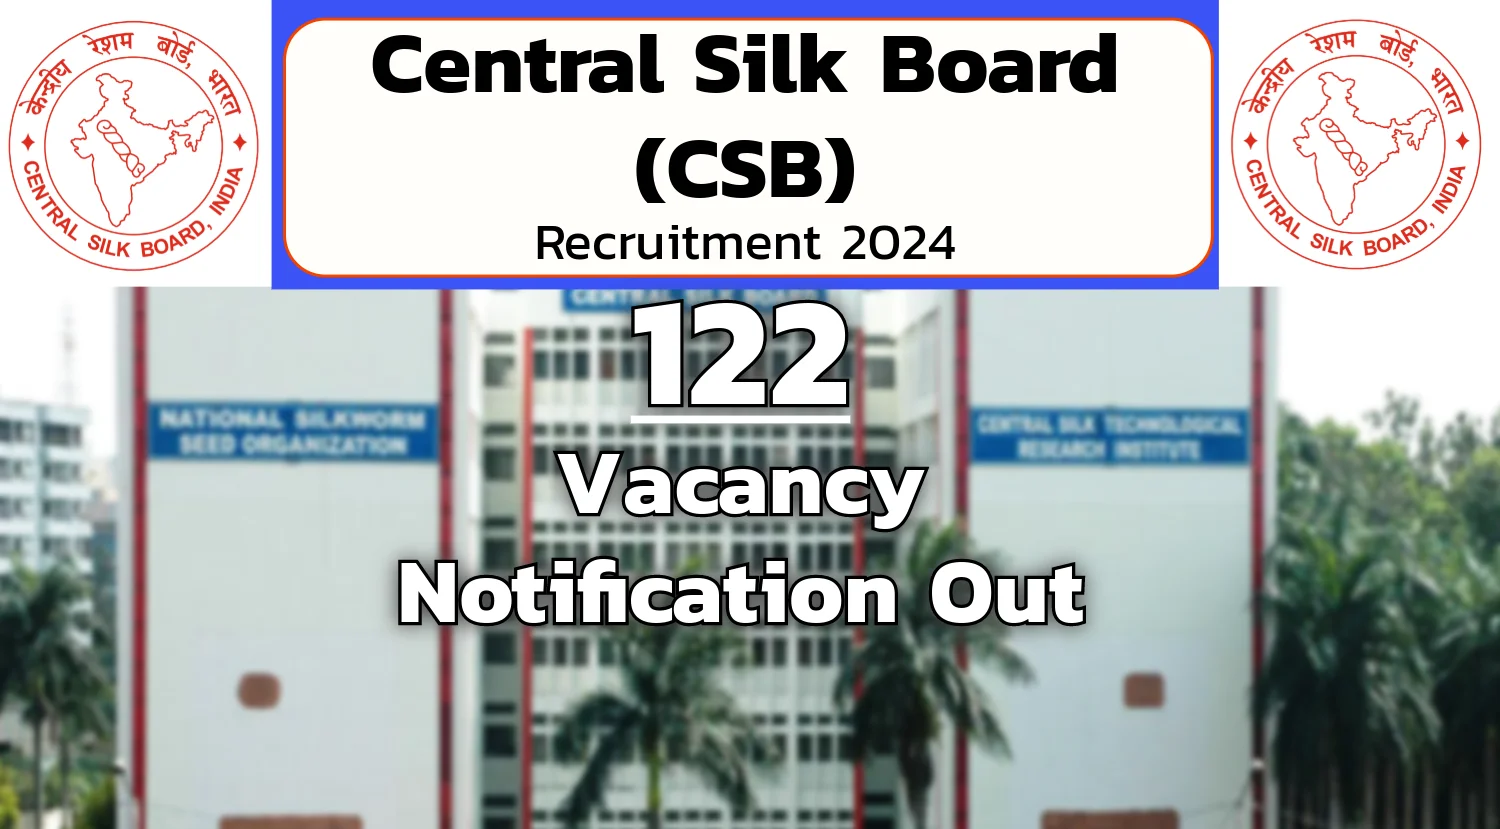 Central Silk Board (CSB) Recruitment 2024 Out for 122 Vacancies for Scientist-B, Check Eligibility and How to Apply